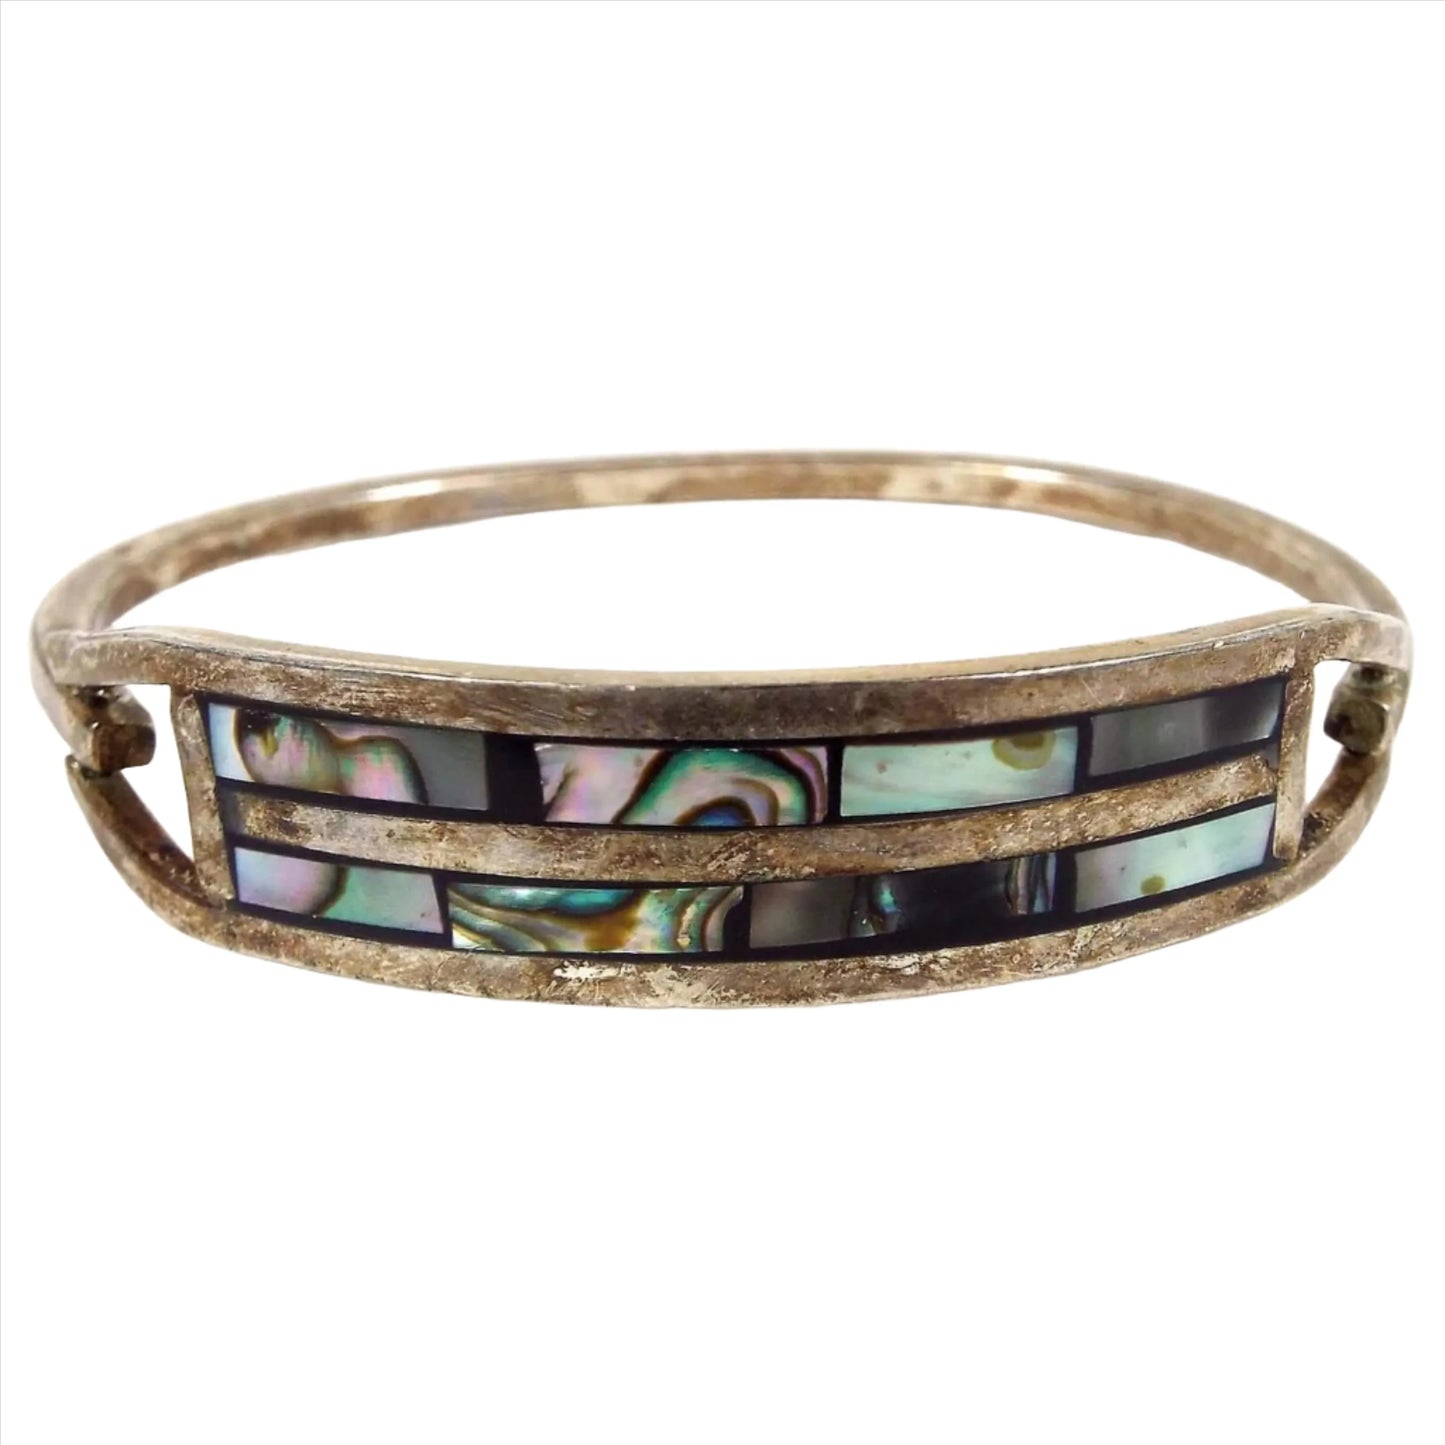 Front view of the retro vintage Taxco hinged bangle bracelet. It has darkened silver tone color metal. The front has a curved bar area with two rows of pearly multi color inlaid abalone shell.